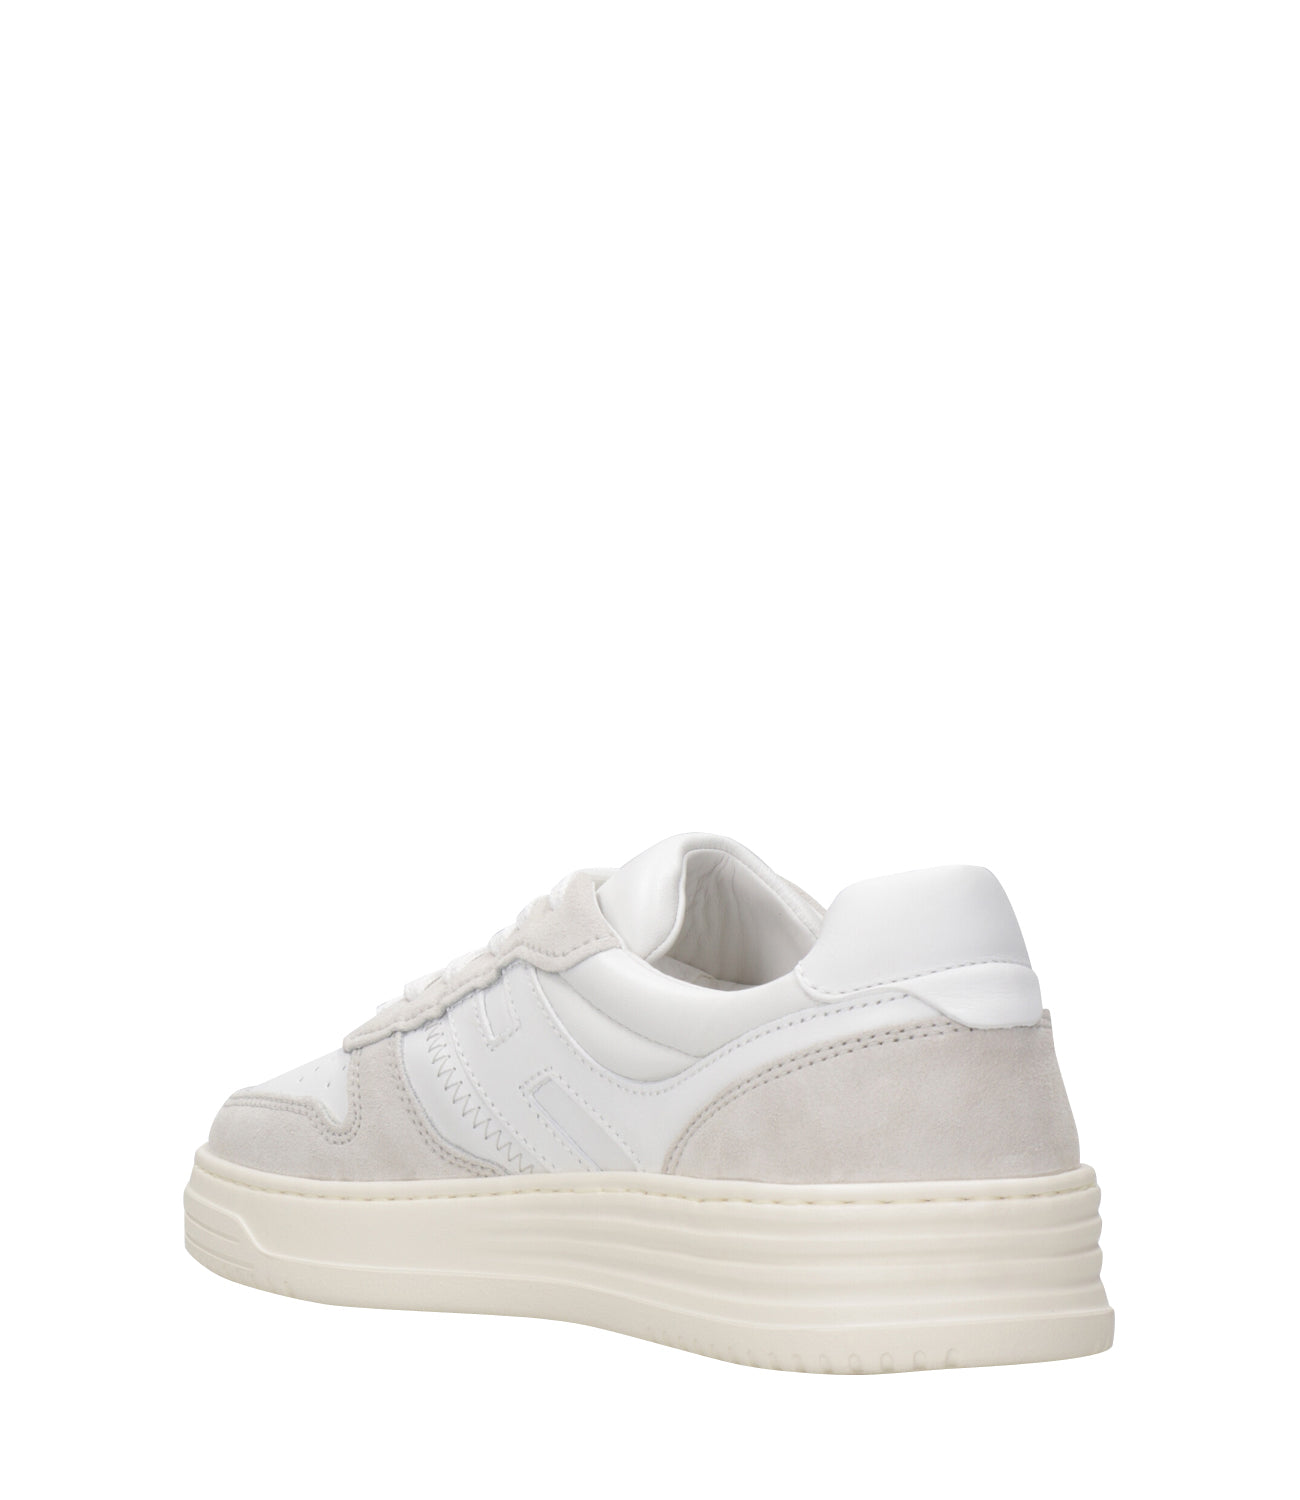 Hogan | Sneakers H630 White and Beige